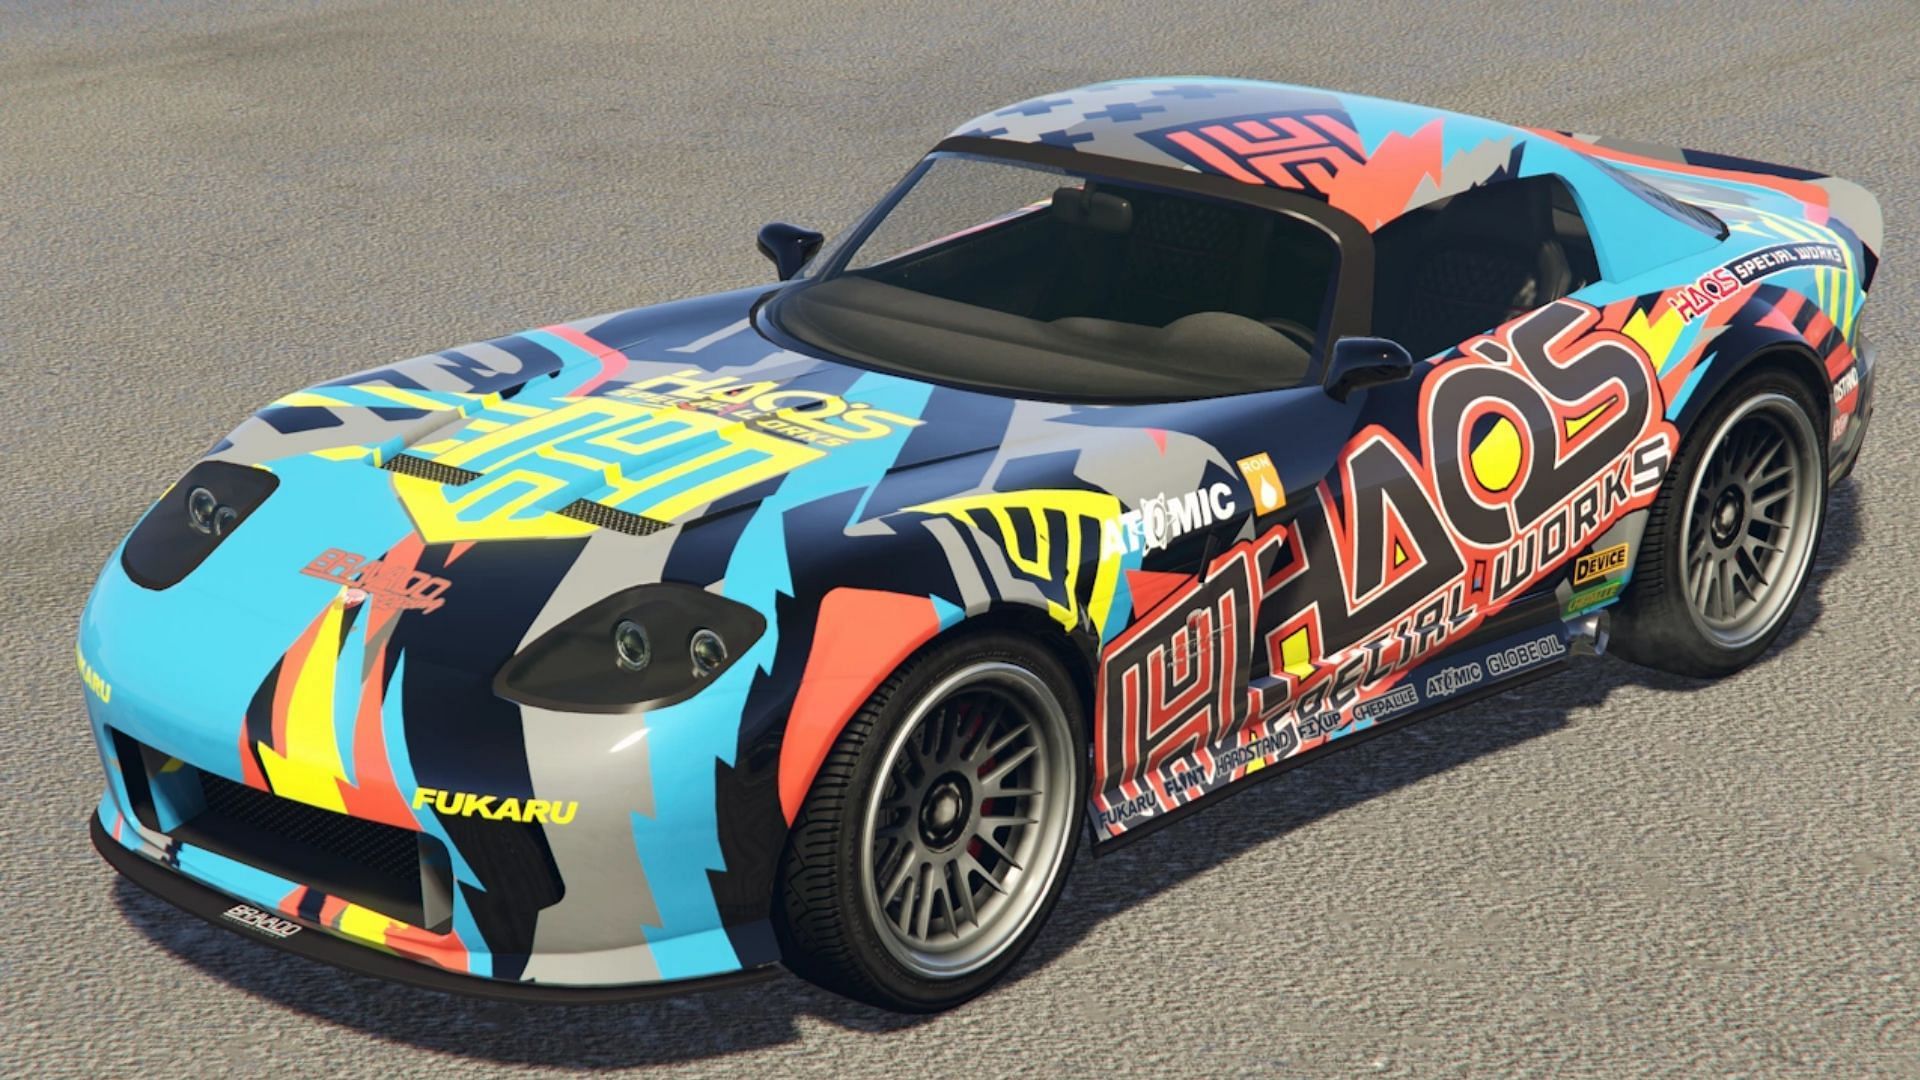 The Banshee with an HSW livery (Image via Rockstar Games)